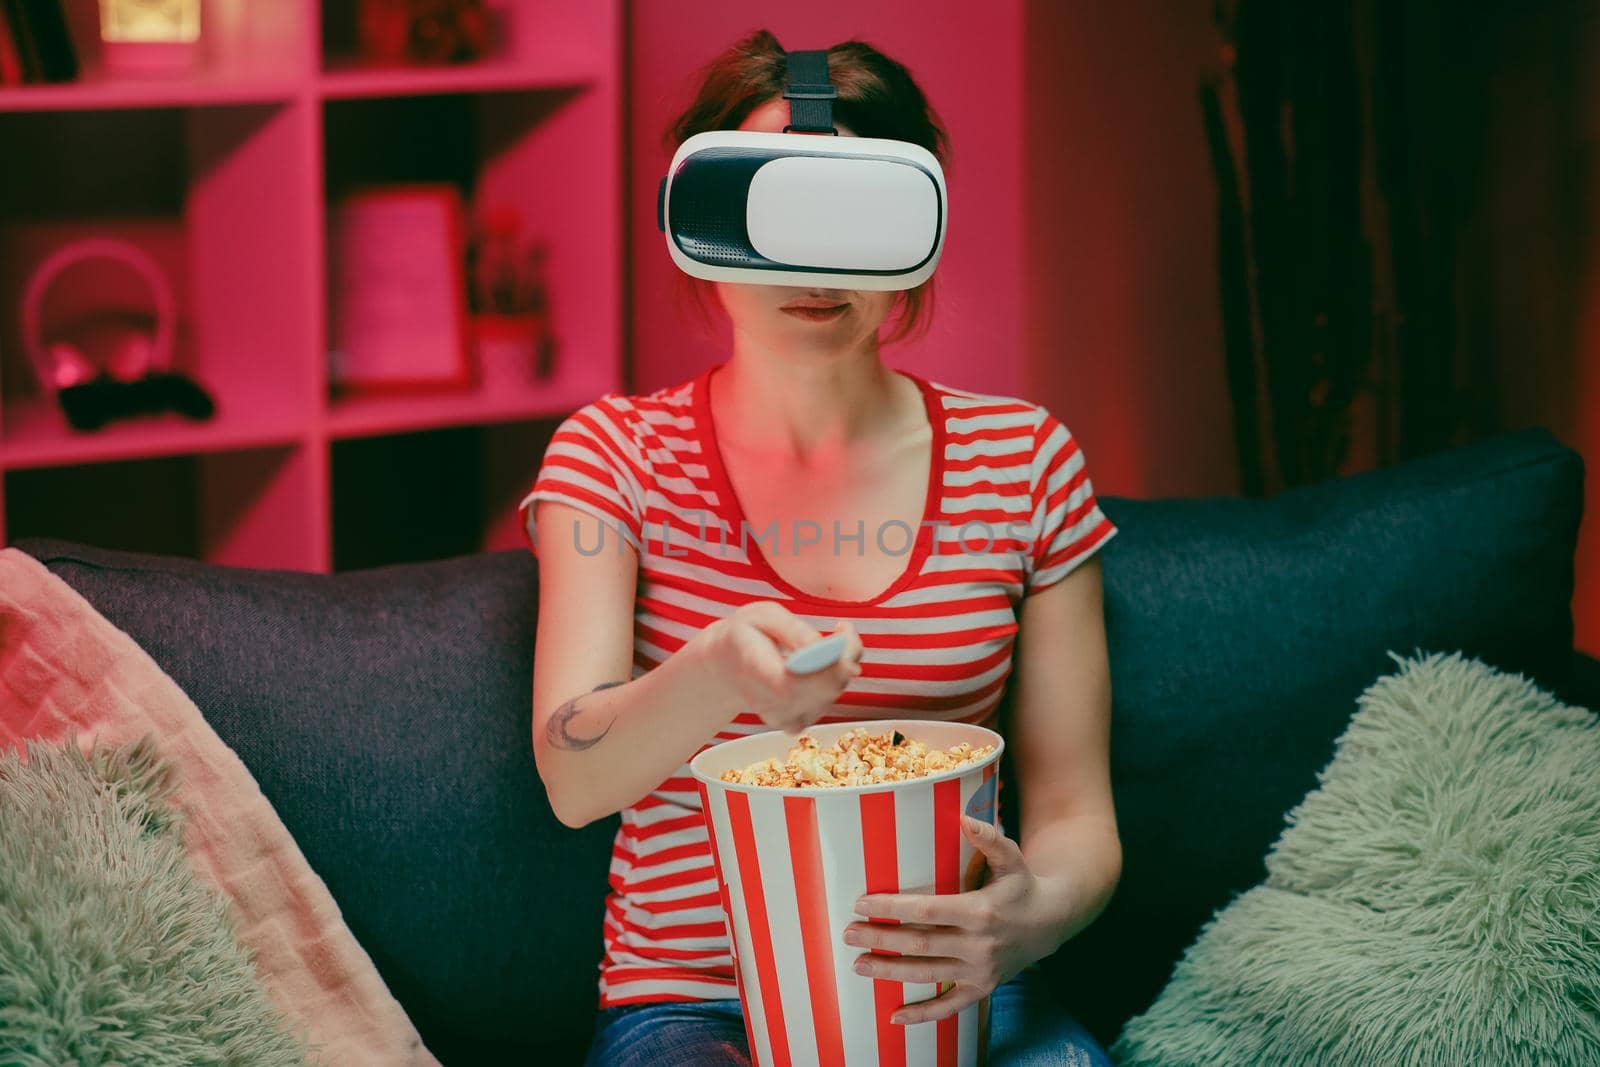 Portrait of the young woman sitting on the couch and having the VR headset, watching something while eating popcorn and smiling by uflypro